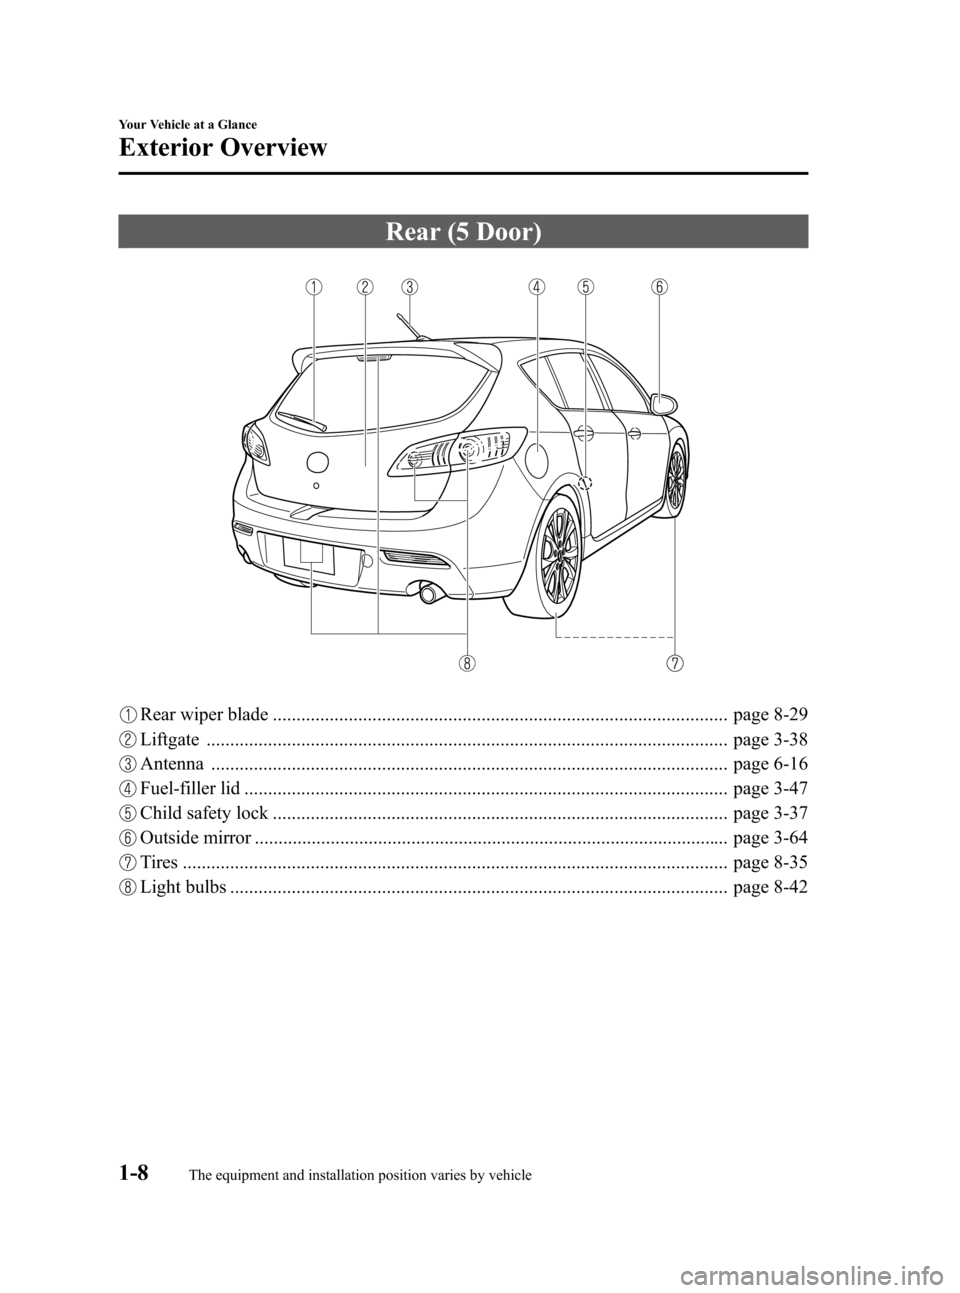 MAZDA MODEL 3 HATCHBACK 2011  Owners Manual (in English) Black plate (14,1)
Rear (5 Door)
Rear wiper blade ................................................................................................ page 8-29
Liftgate ..................................